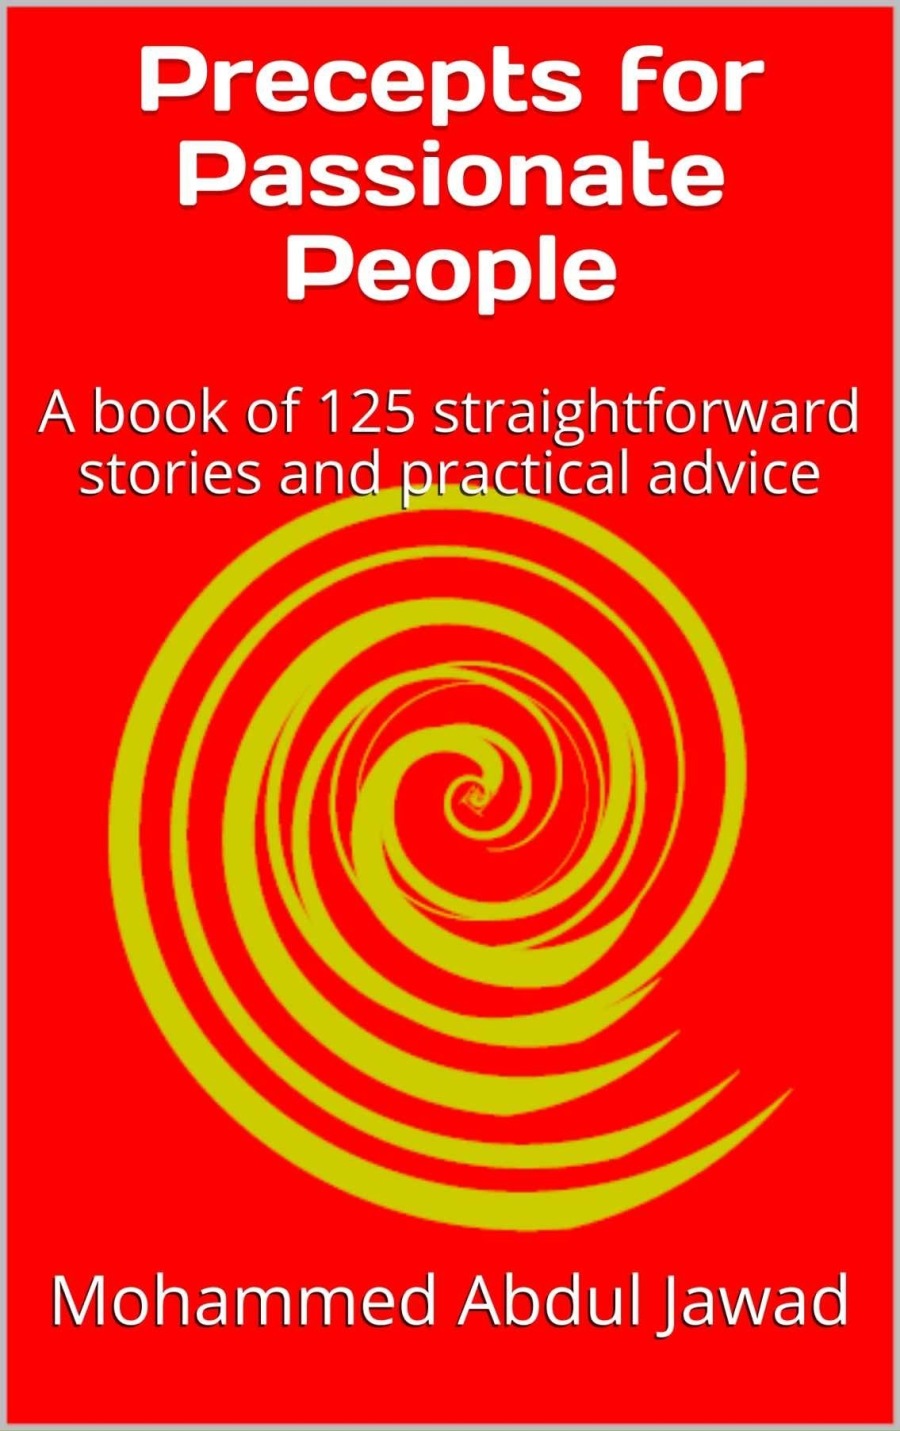 Precepts for
Passionate
People

A book of 125 straightforward
stories and pgactical advice

Mohammed Abdul Jawad